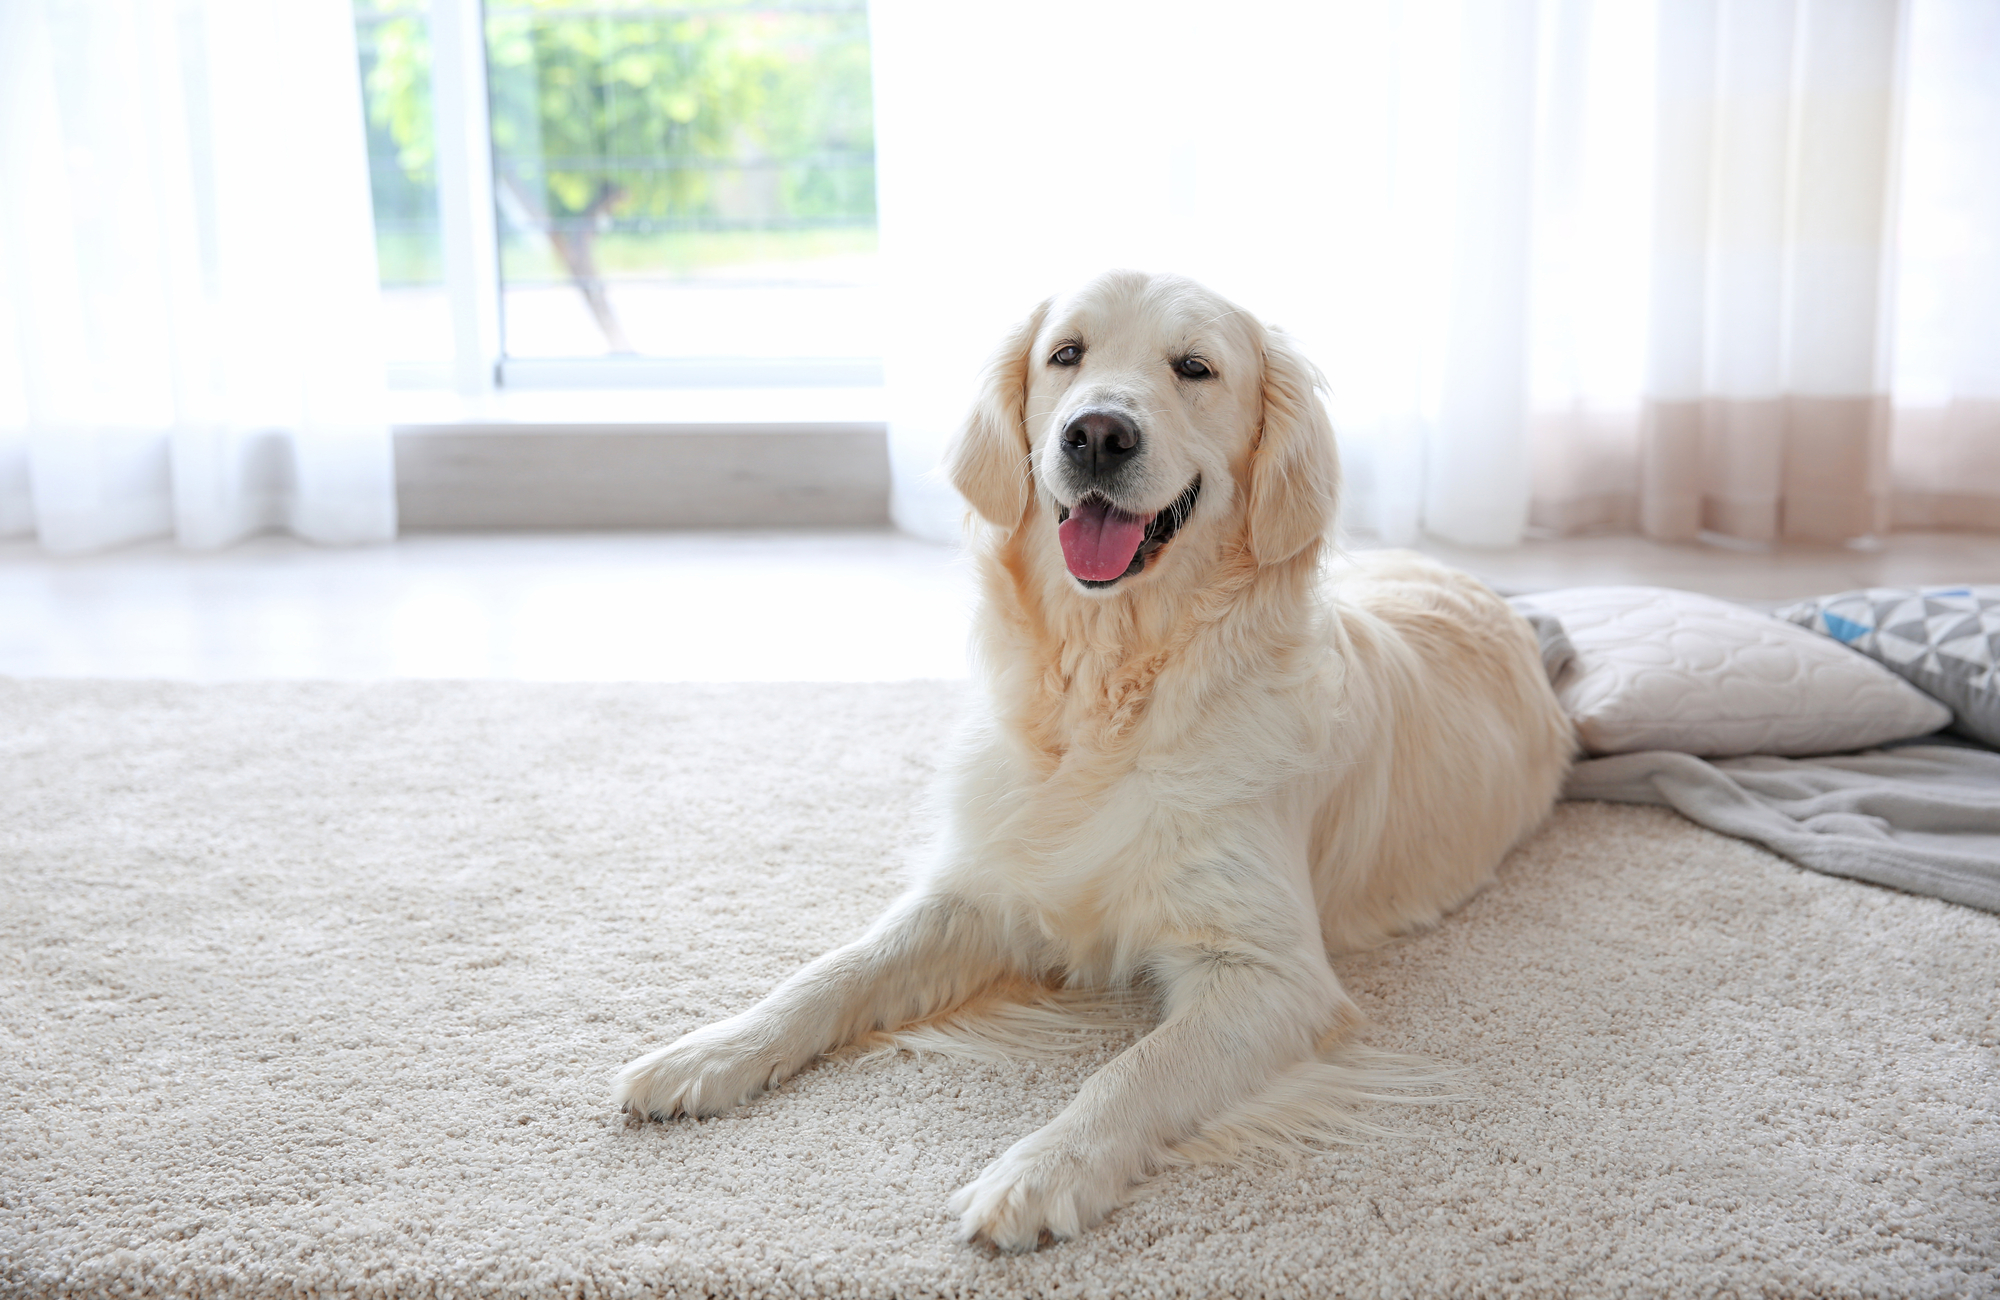 A Cute Dog Laying on Clean Carpet